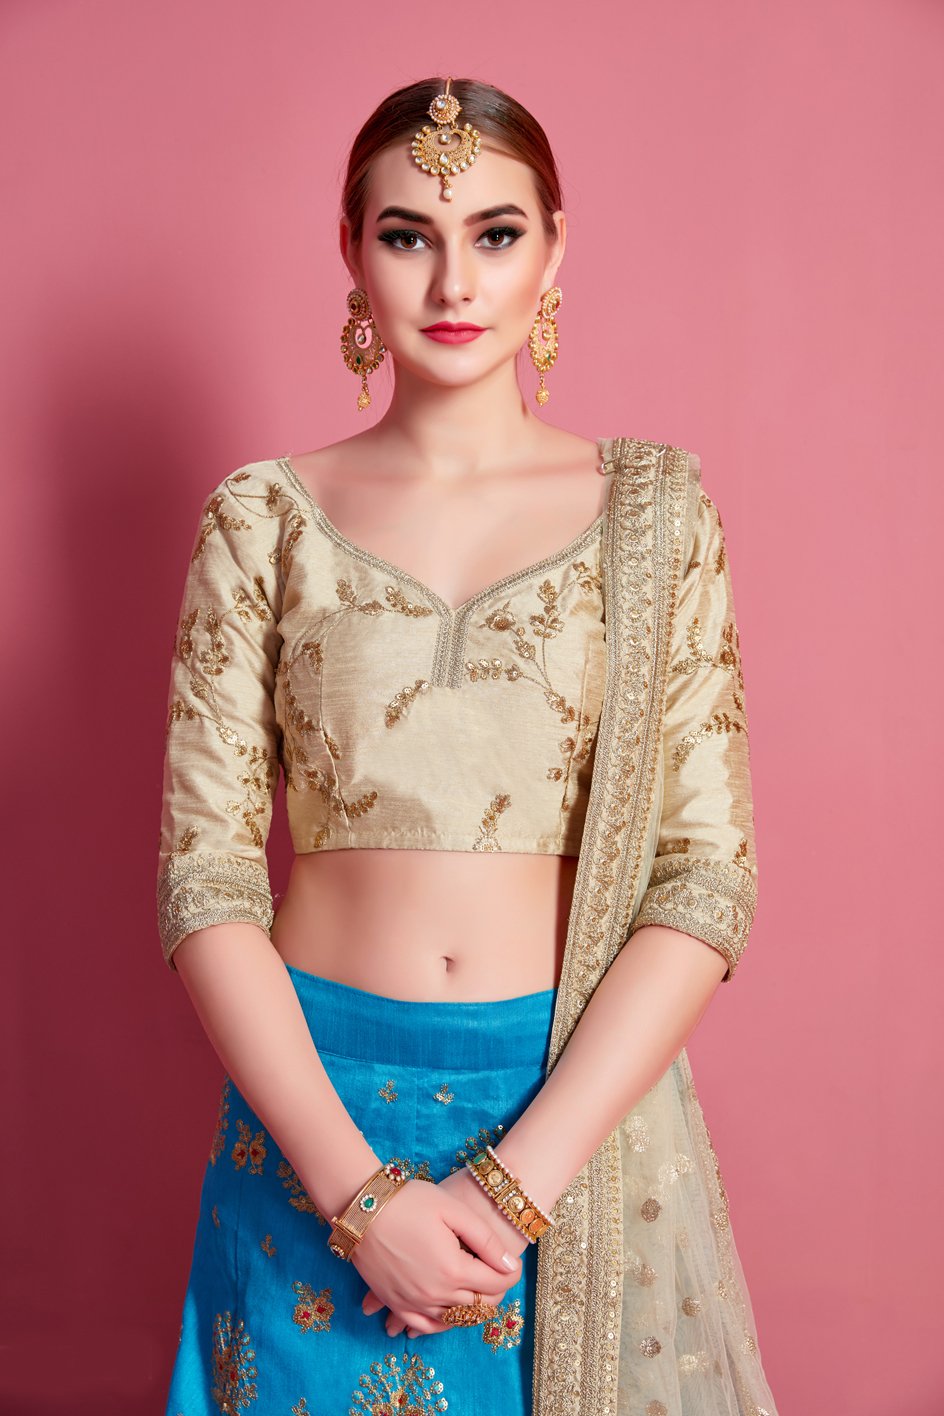 Take Cues From These Wedding Lehenga Blouse Designs For Your Big Day